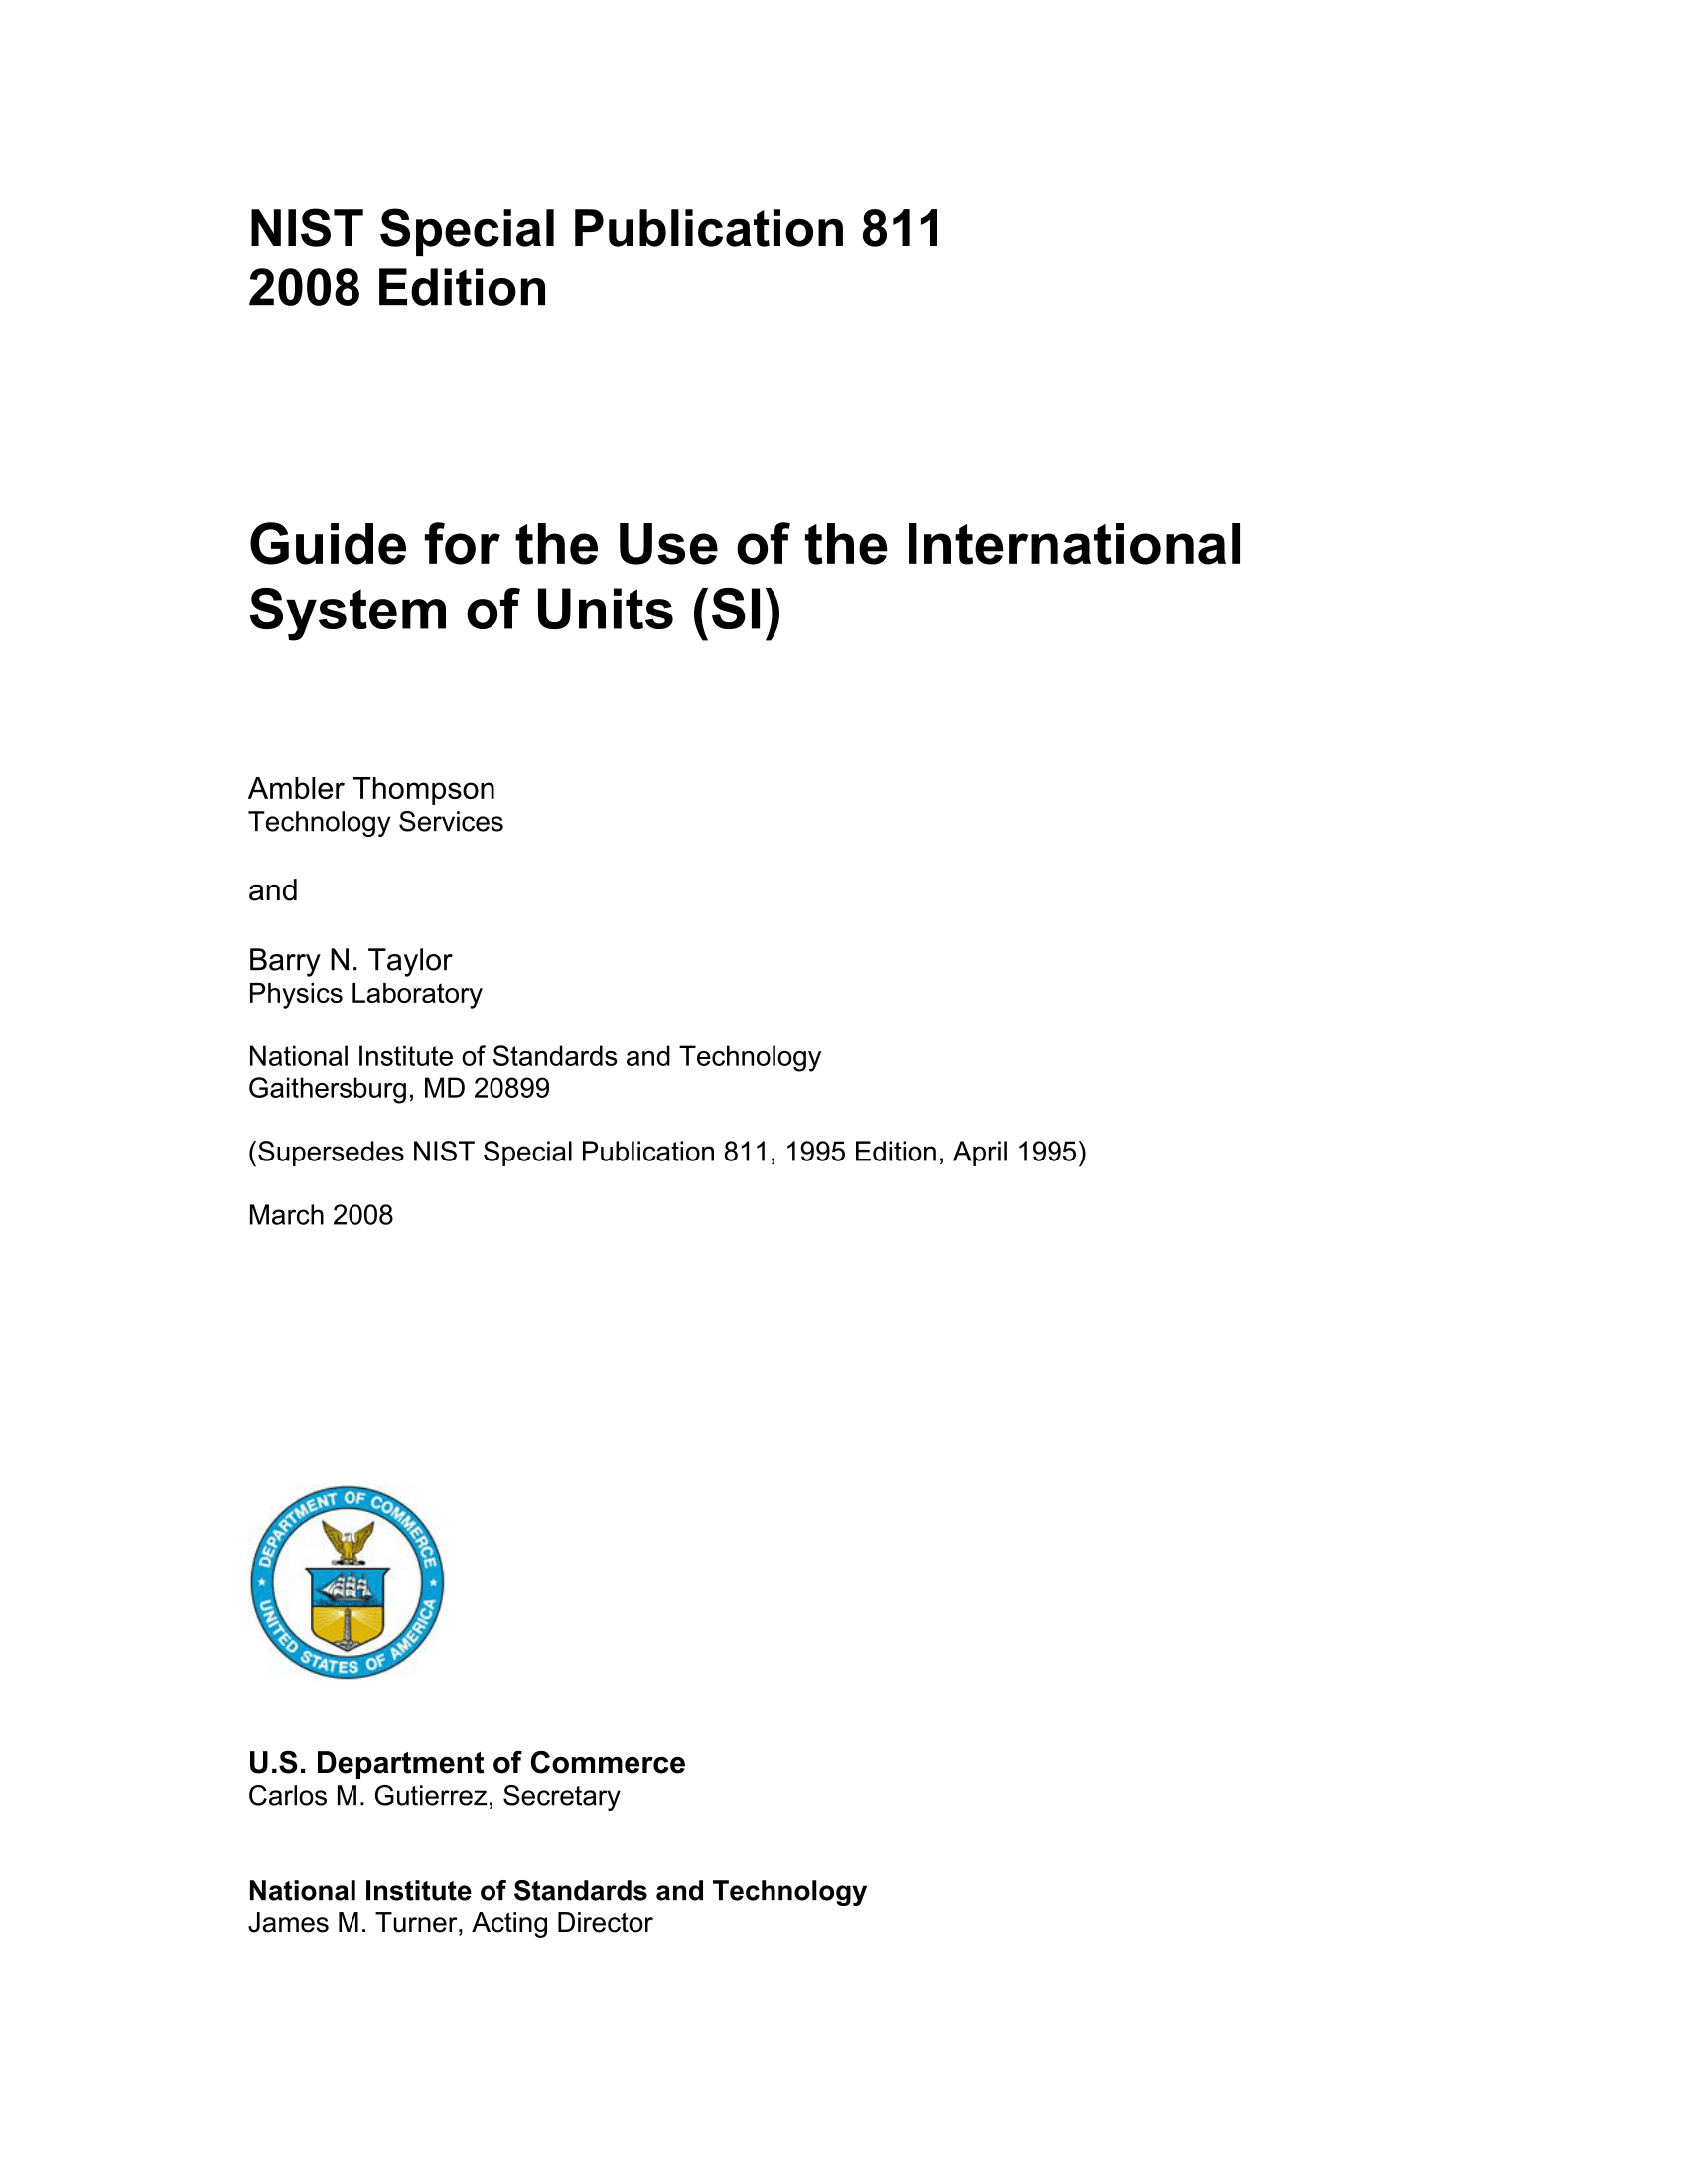 Guide_for_the_Use_of_the_International_System_of_Units-03